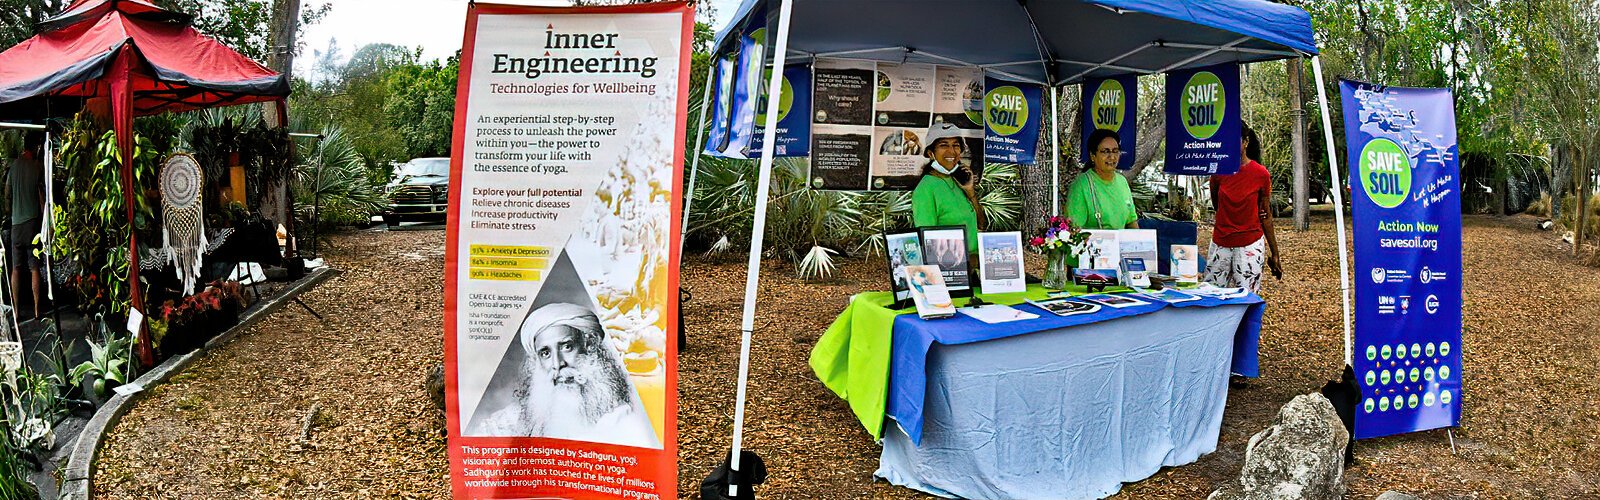 One group at EcoFest is Save Soil, a global movement launched by Indian yogi and visionary Sadhguru to create awareness about soil degradation and bring policies to safeguard soil health by increasing the organic content in soil.